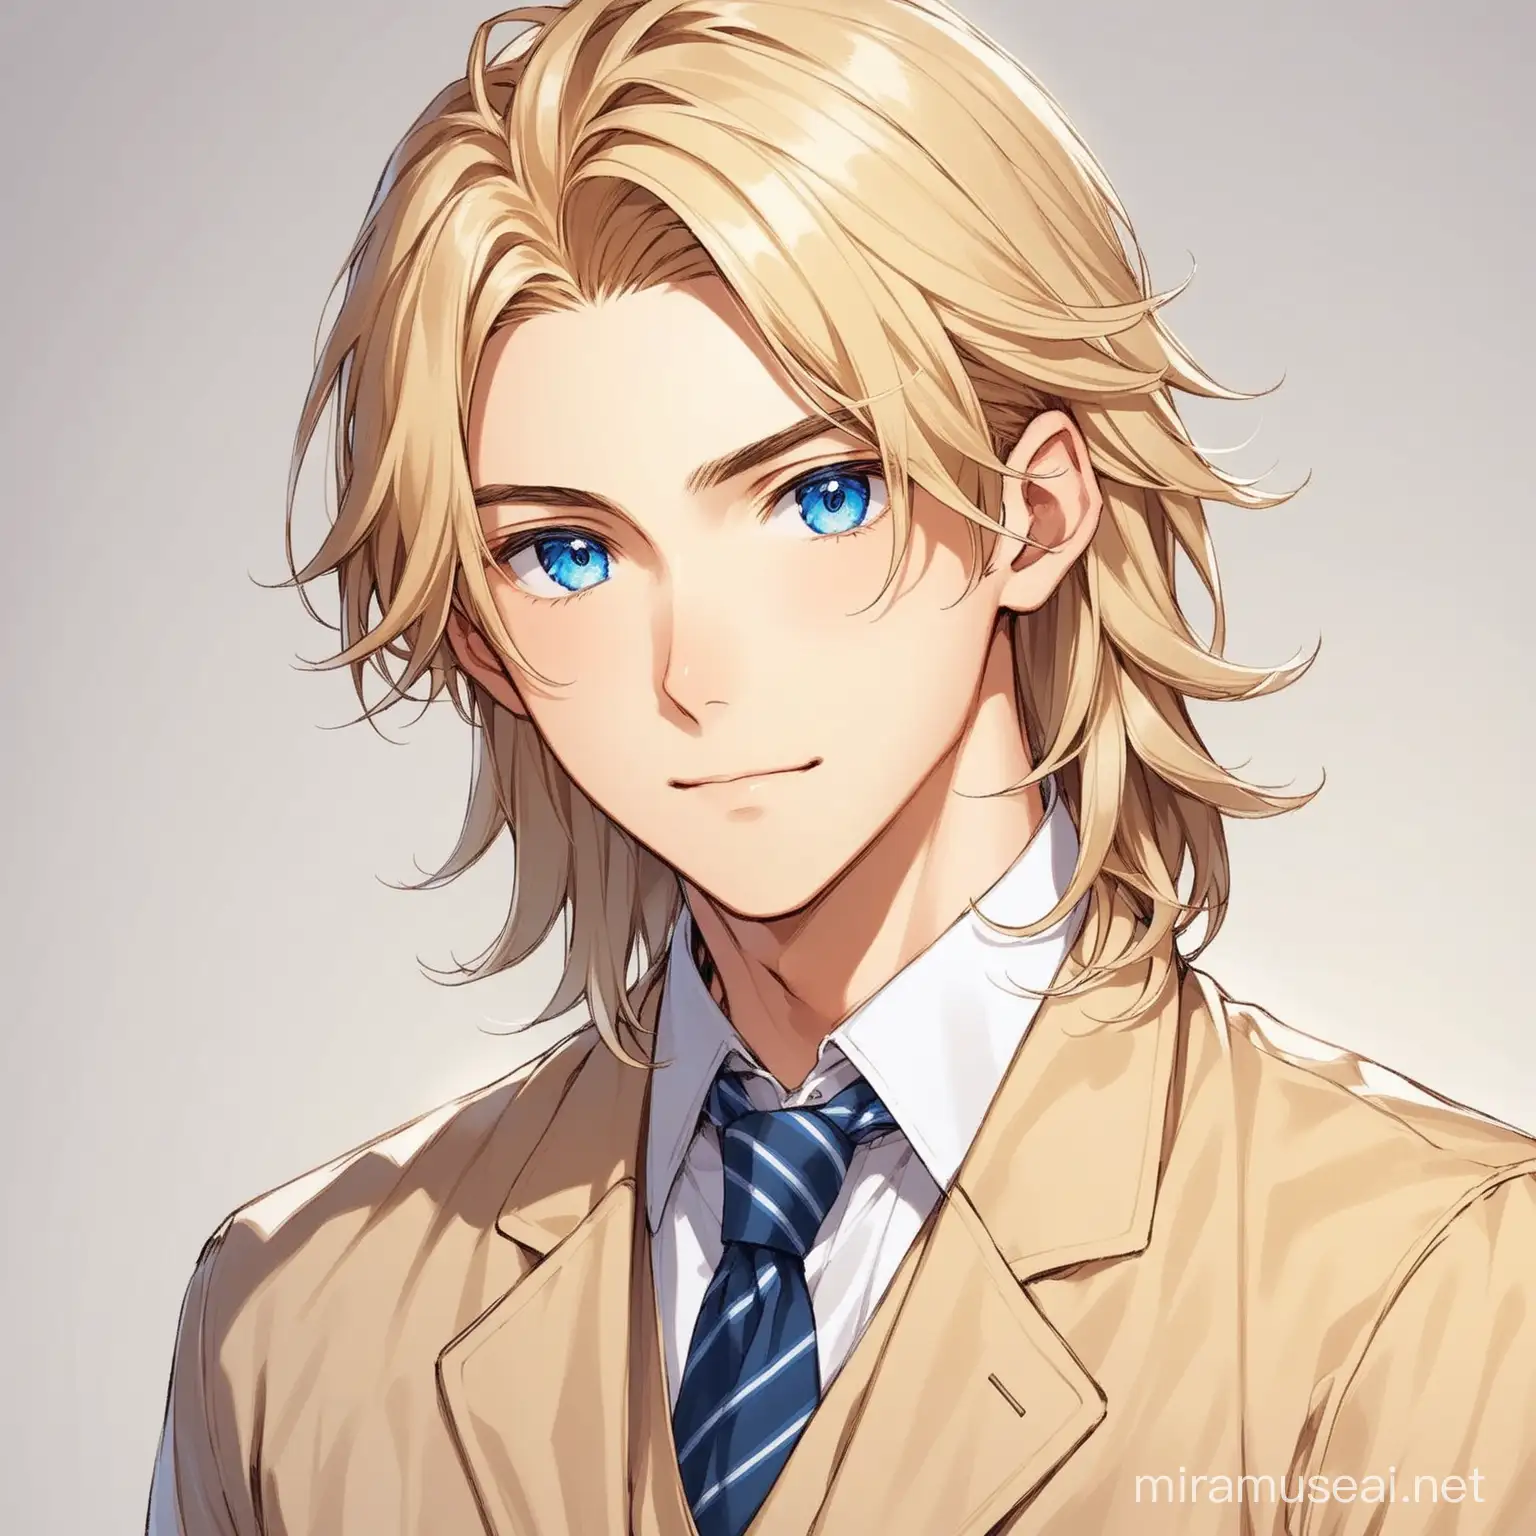 Handsome 18YearOld Guy in School Uniform with Wavy Blonde Hair and Blue Eyes